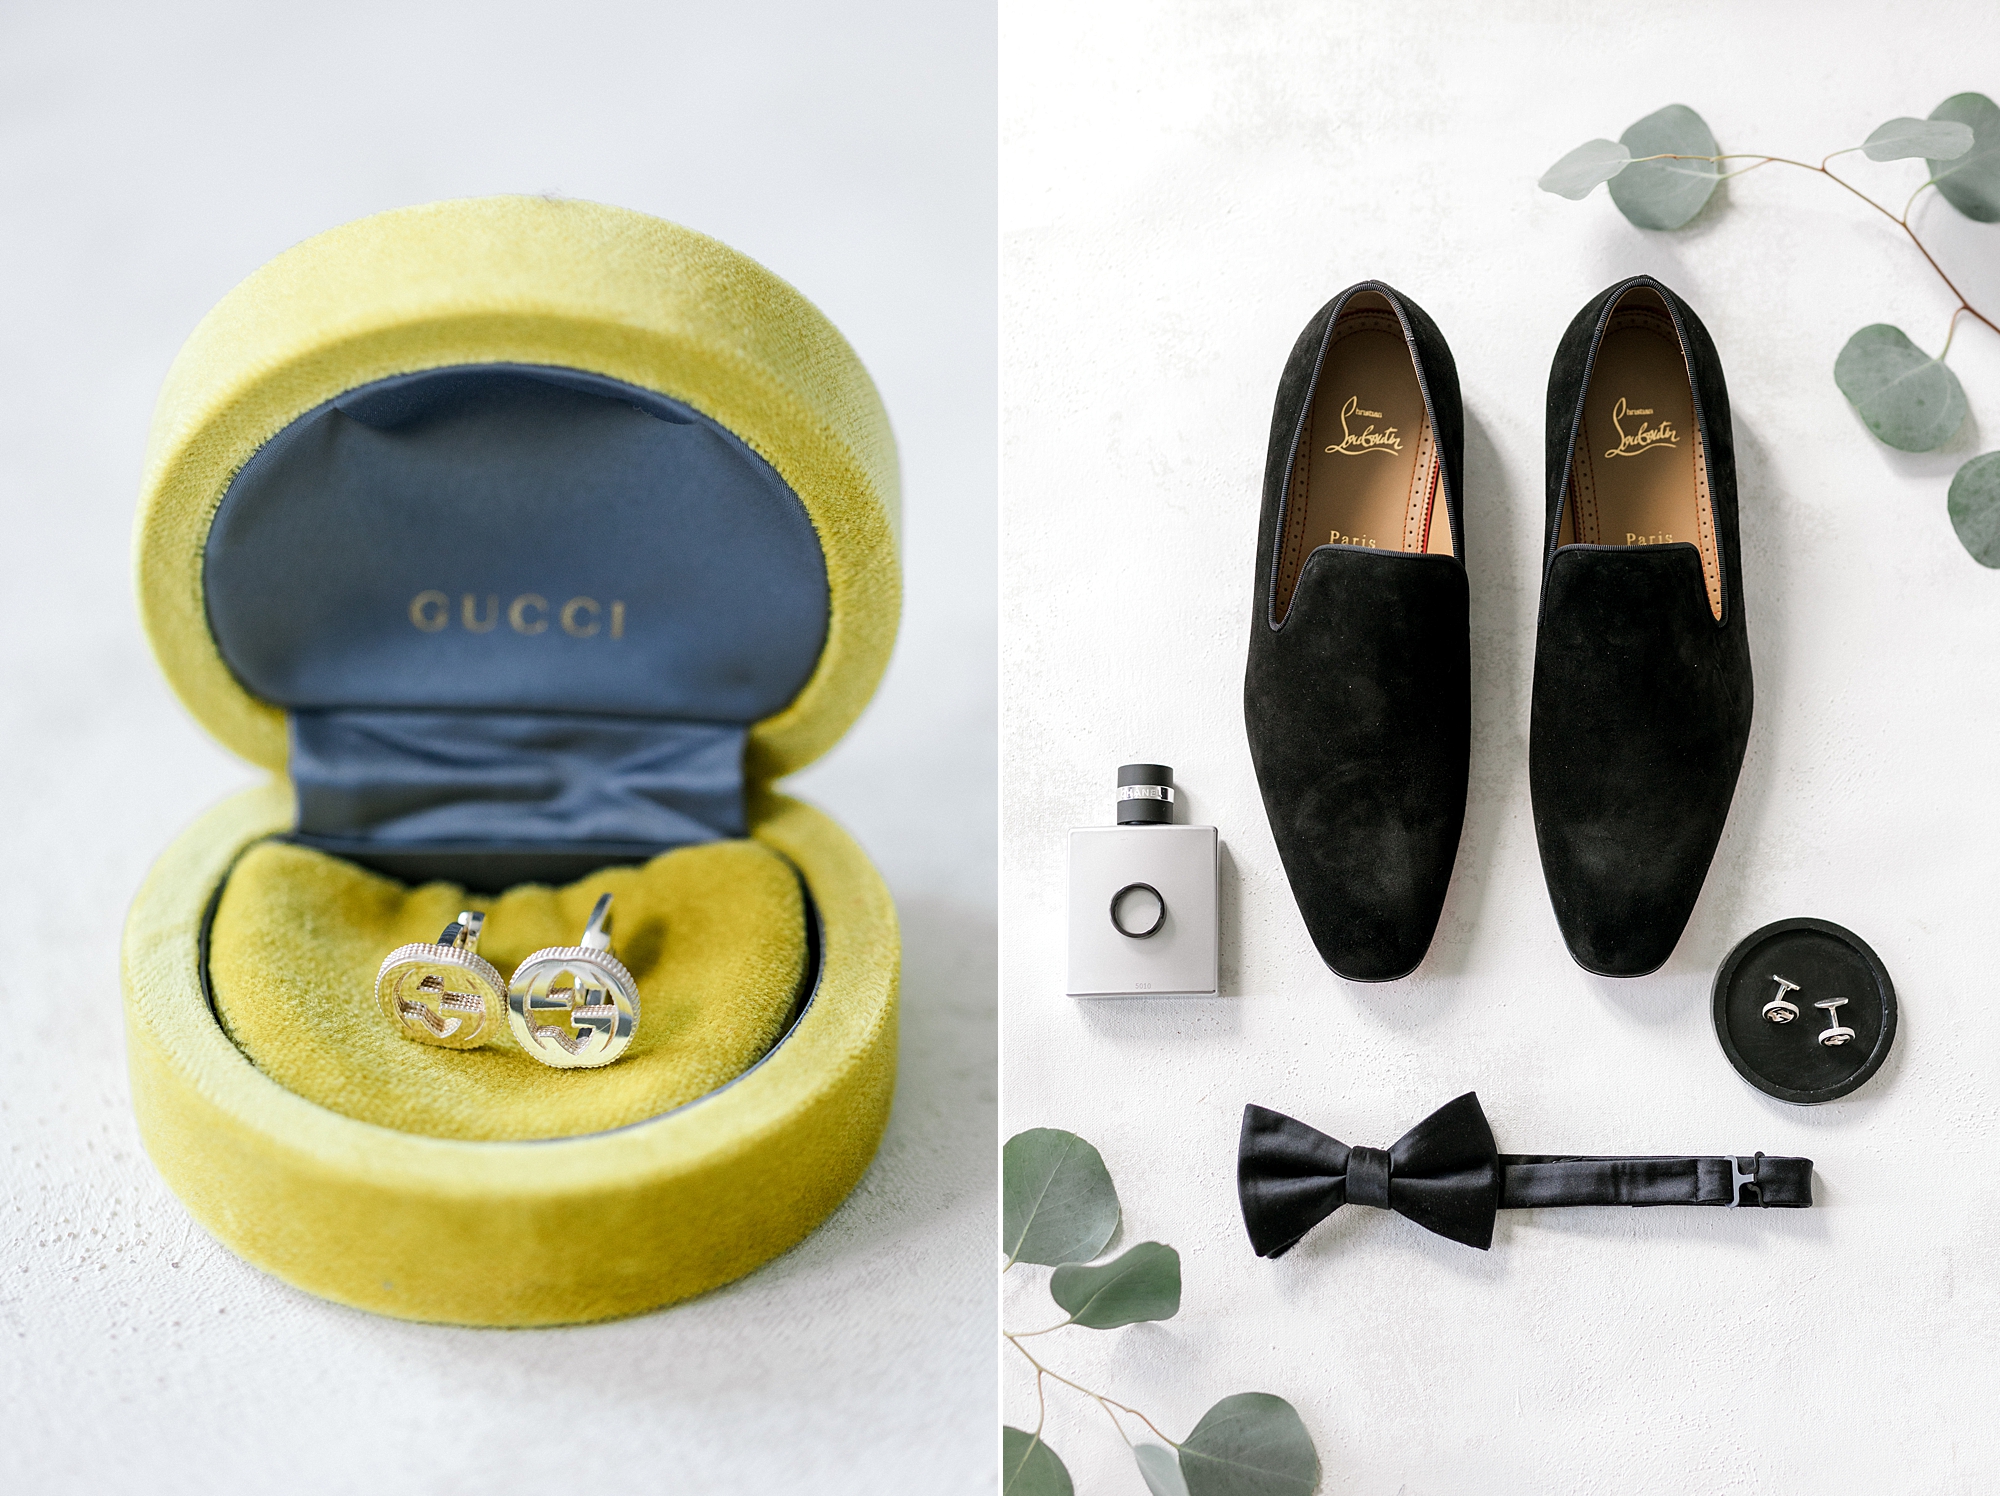 groom's black shoes and cufflinks in Guicci ring box